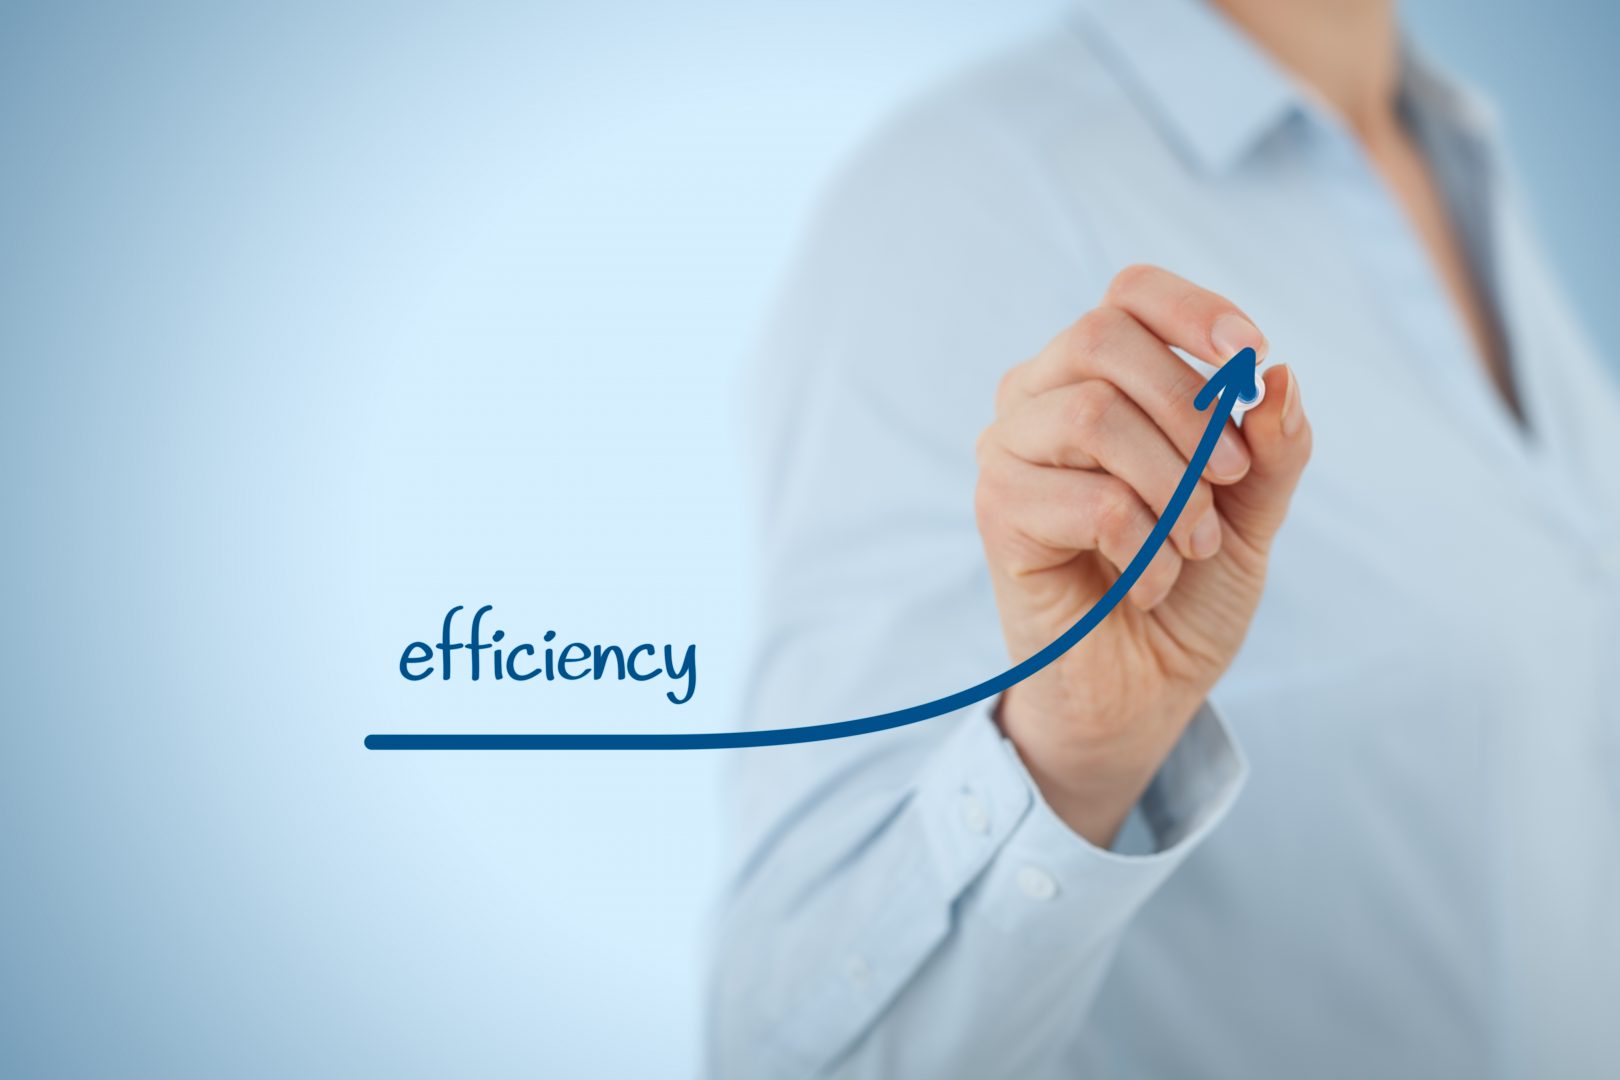 woman drawing the word efficiency with an upward arrow